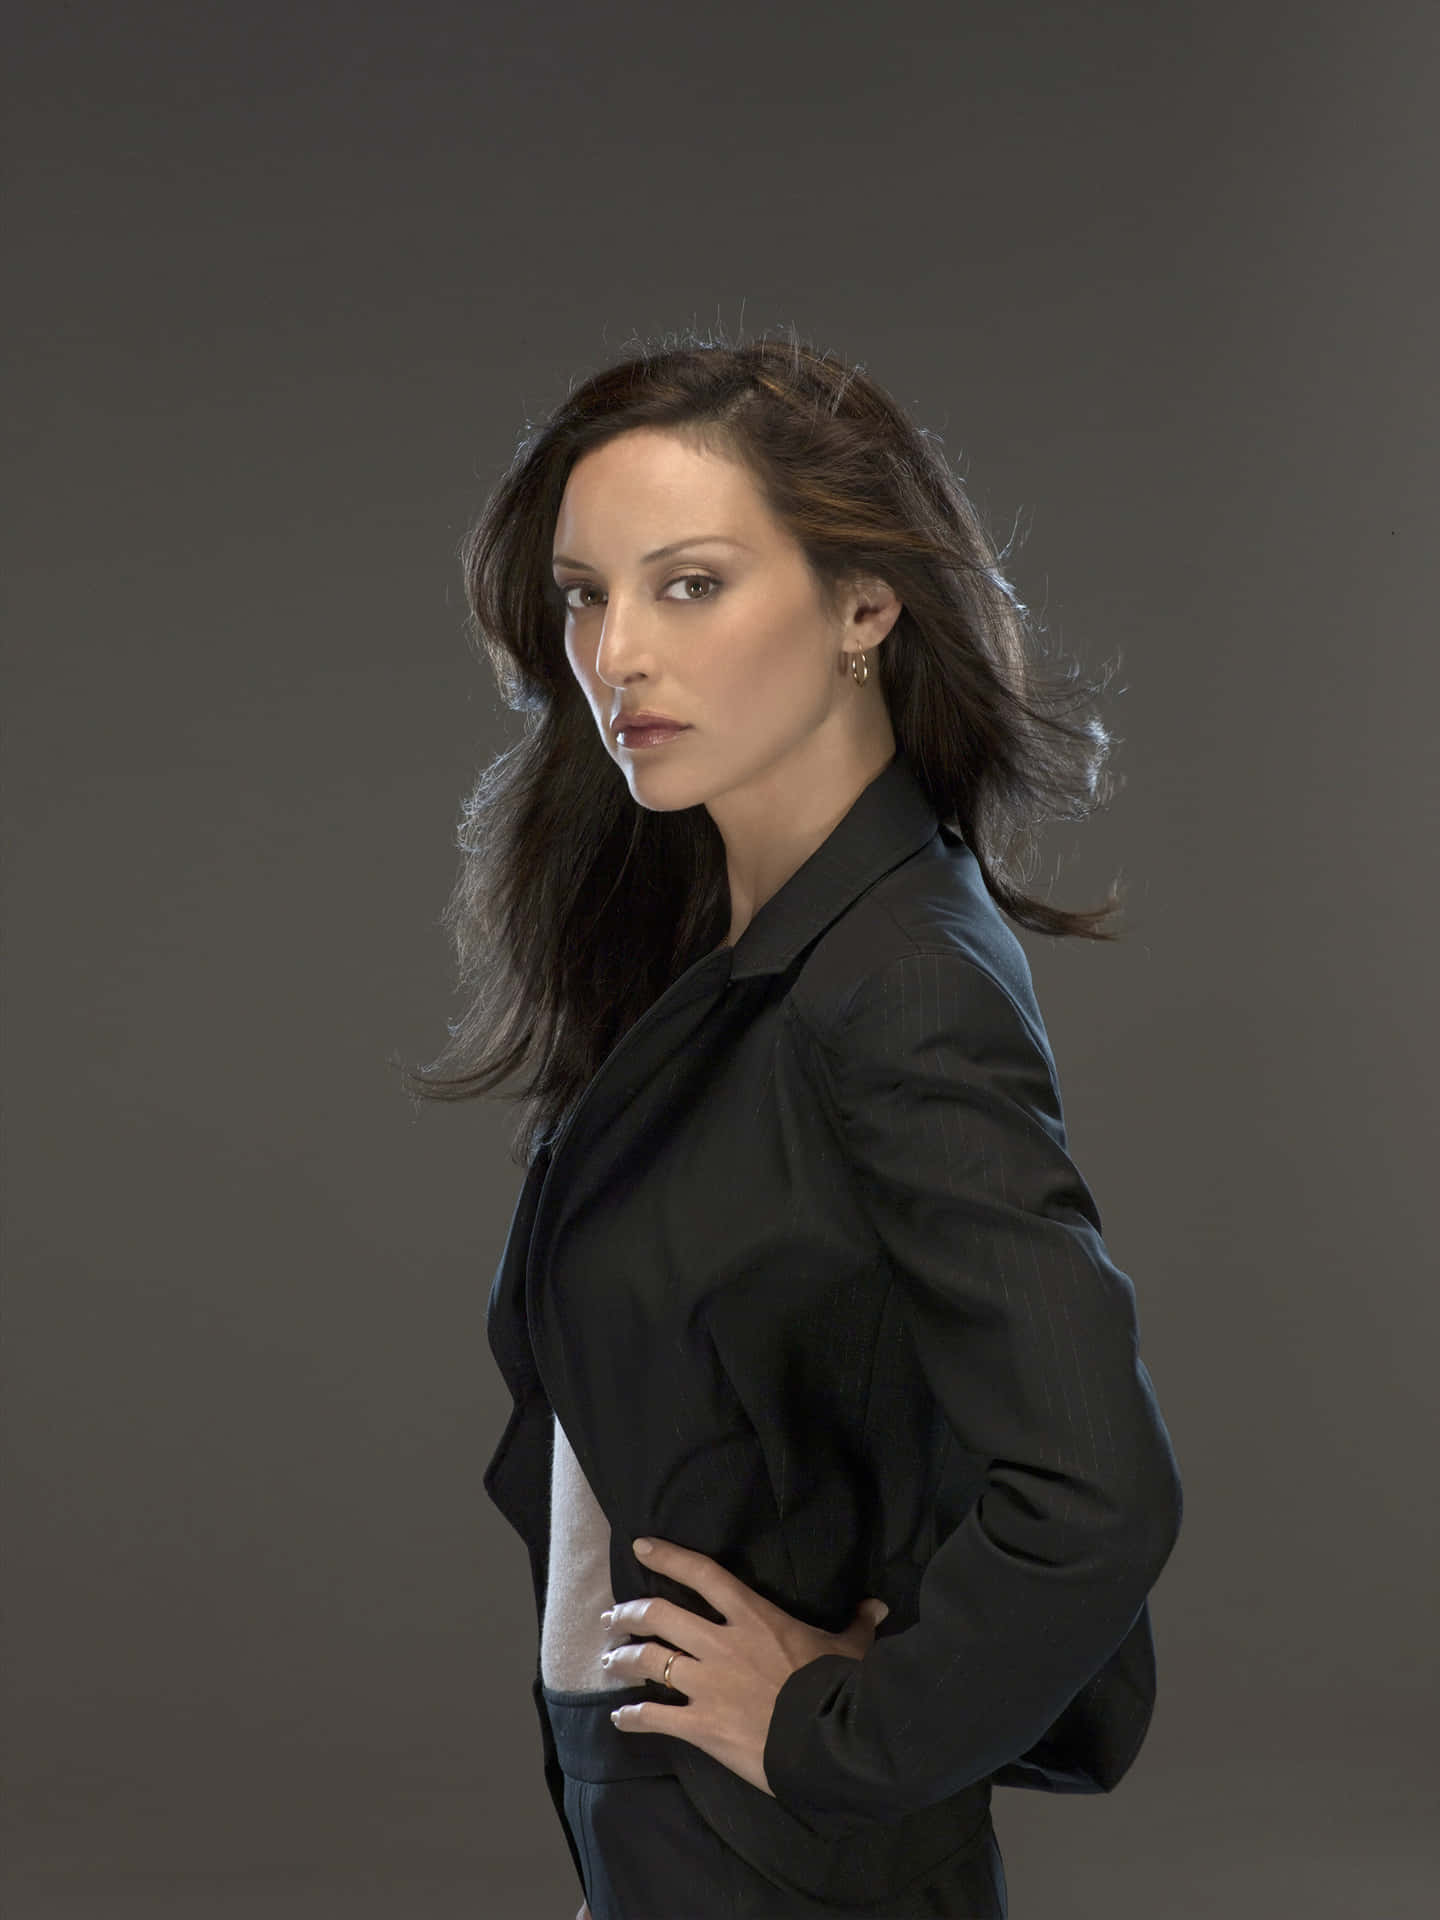 Paget Brewster Posing For A Portrait Background